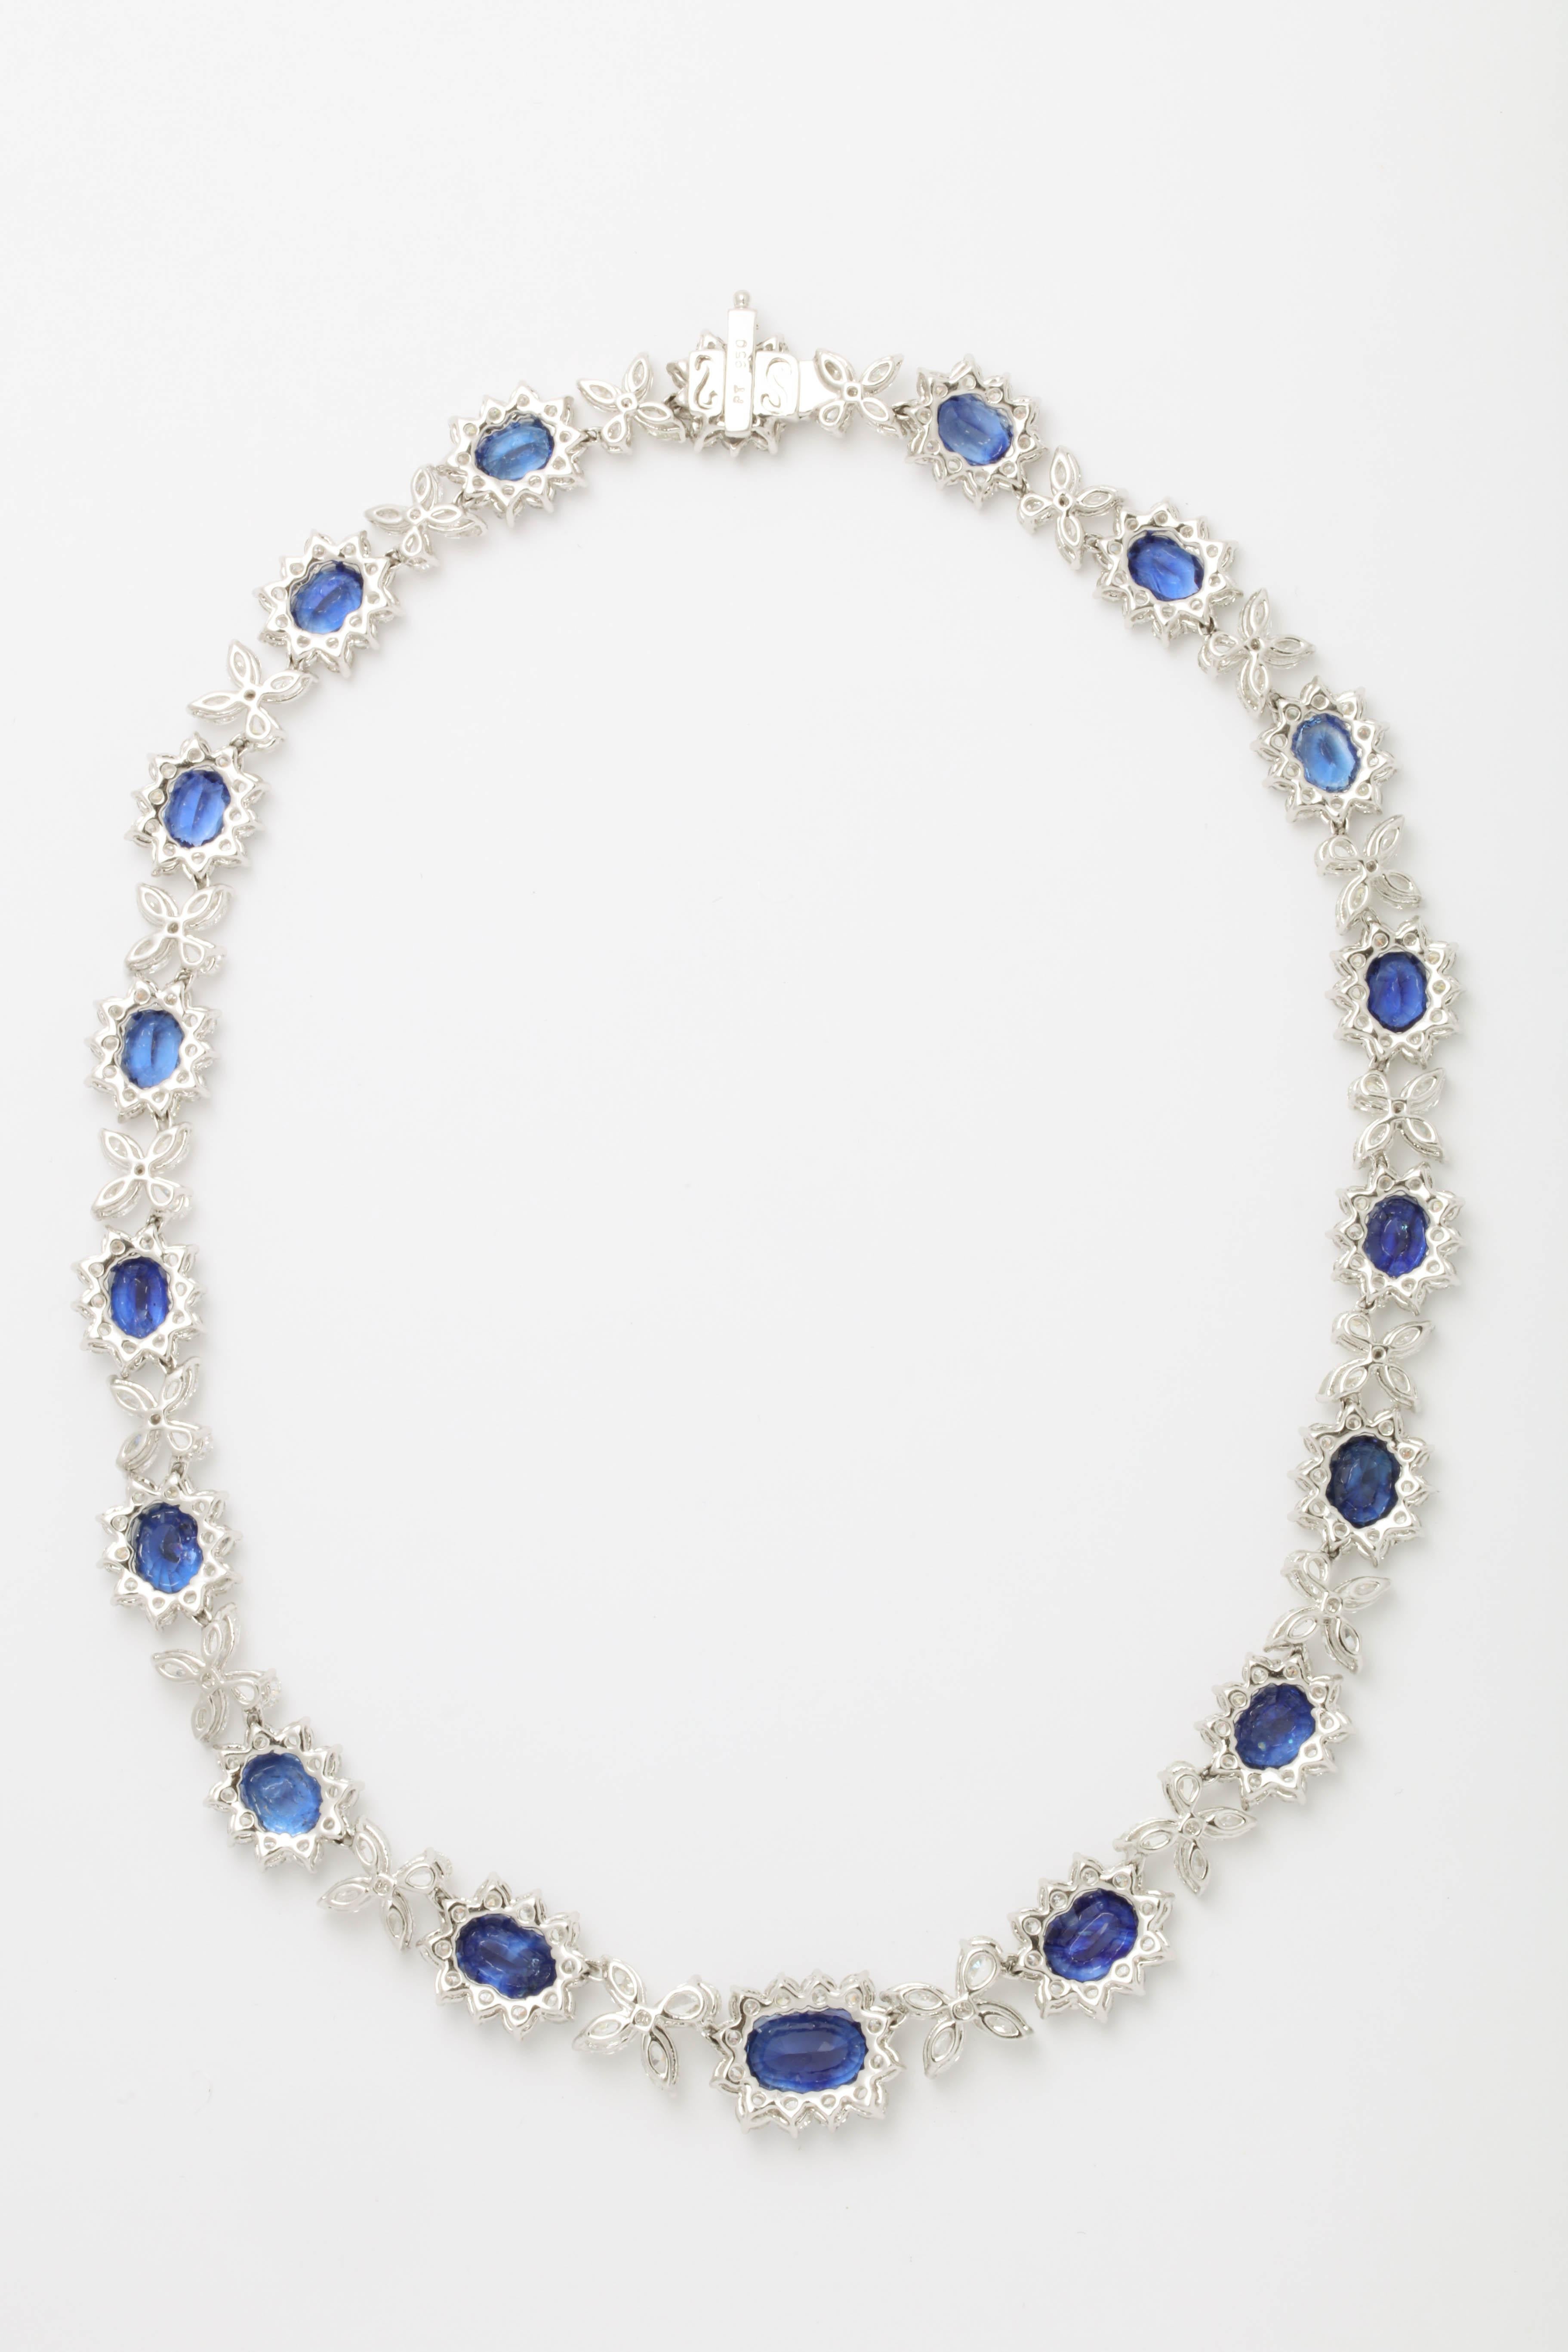 Women's or Men's Blue Sapphire and Diamond Necklace